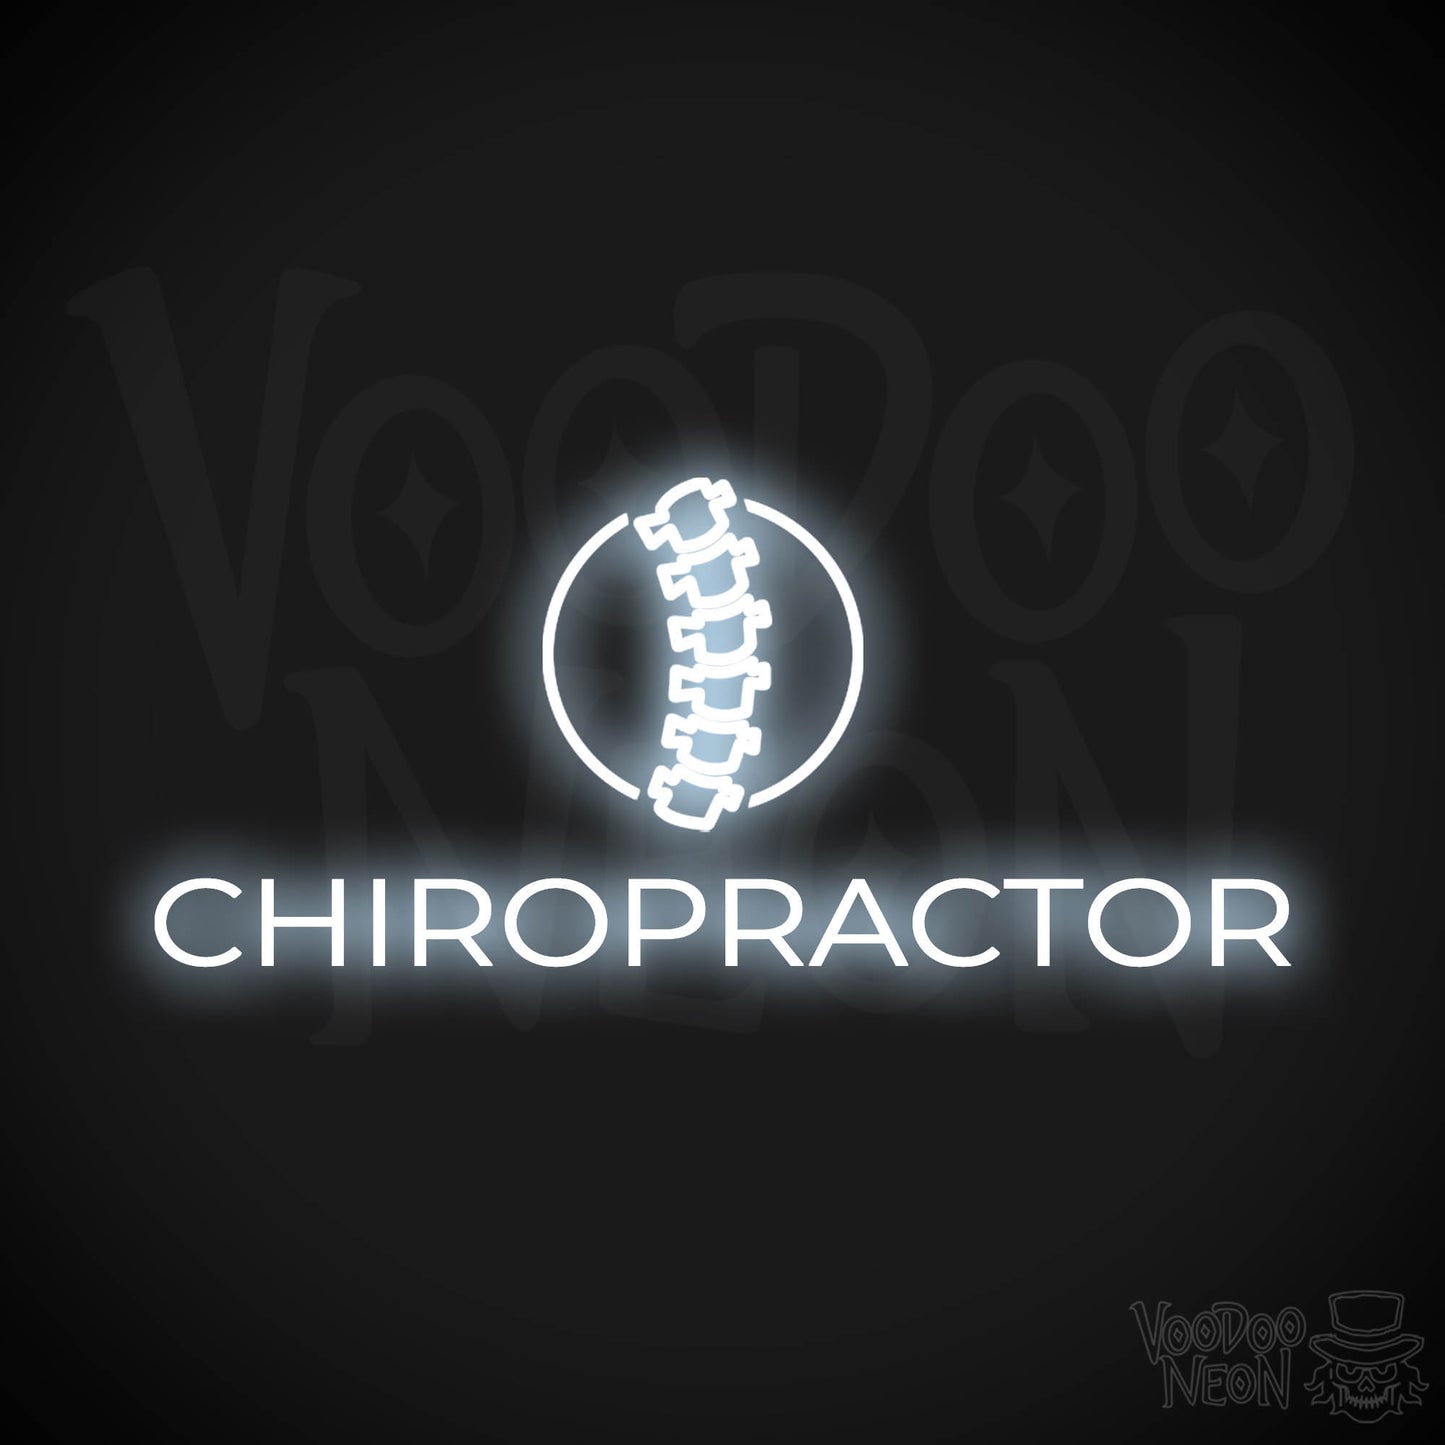 Chiropractor LED Neon - Cool White